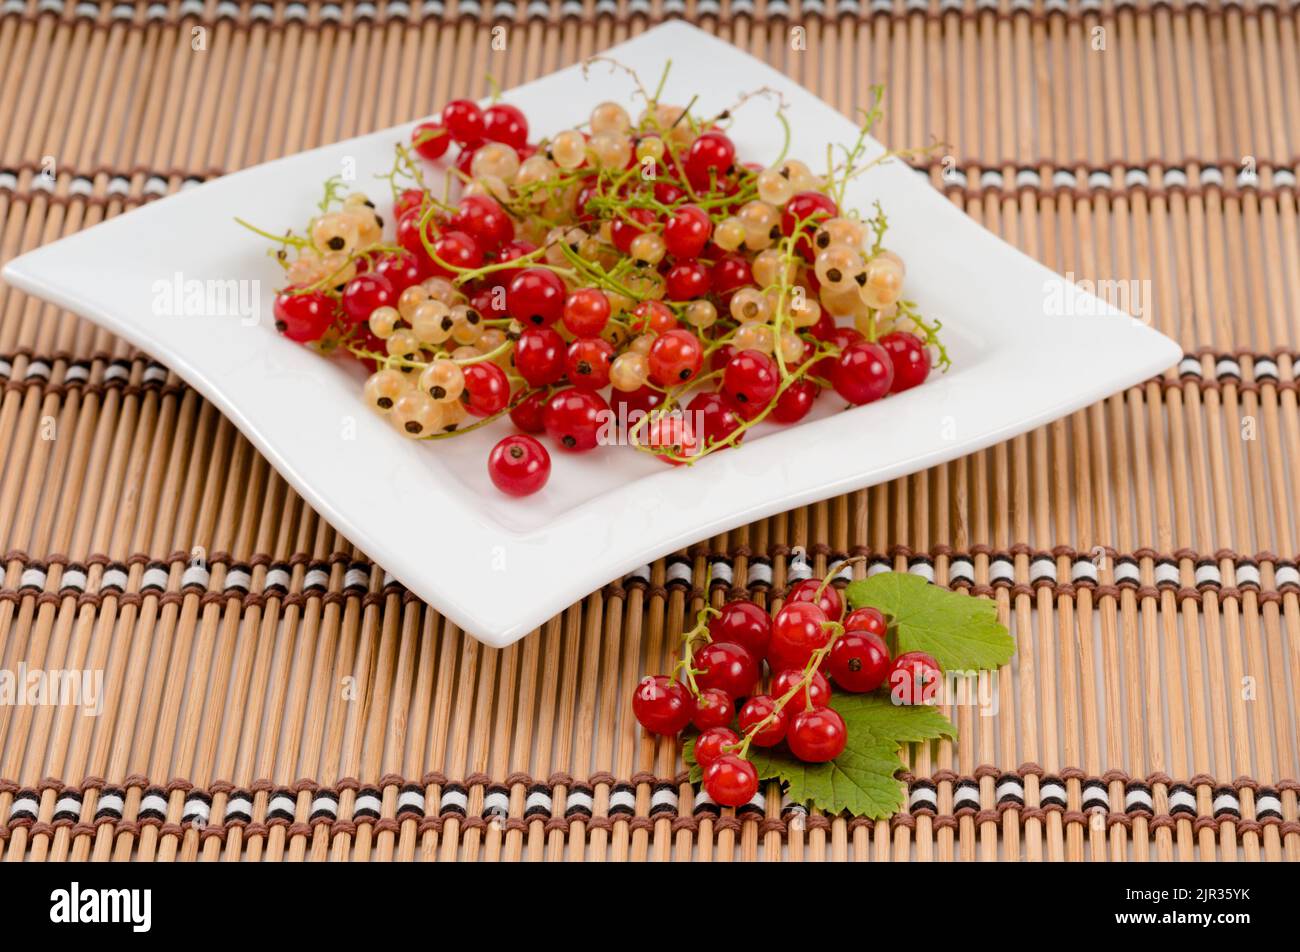 Fresh red and white currant berries on a plate Stock Photo